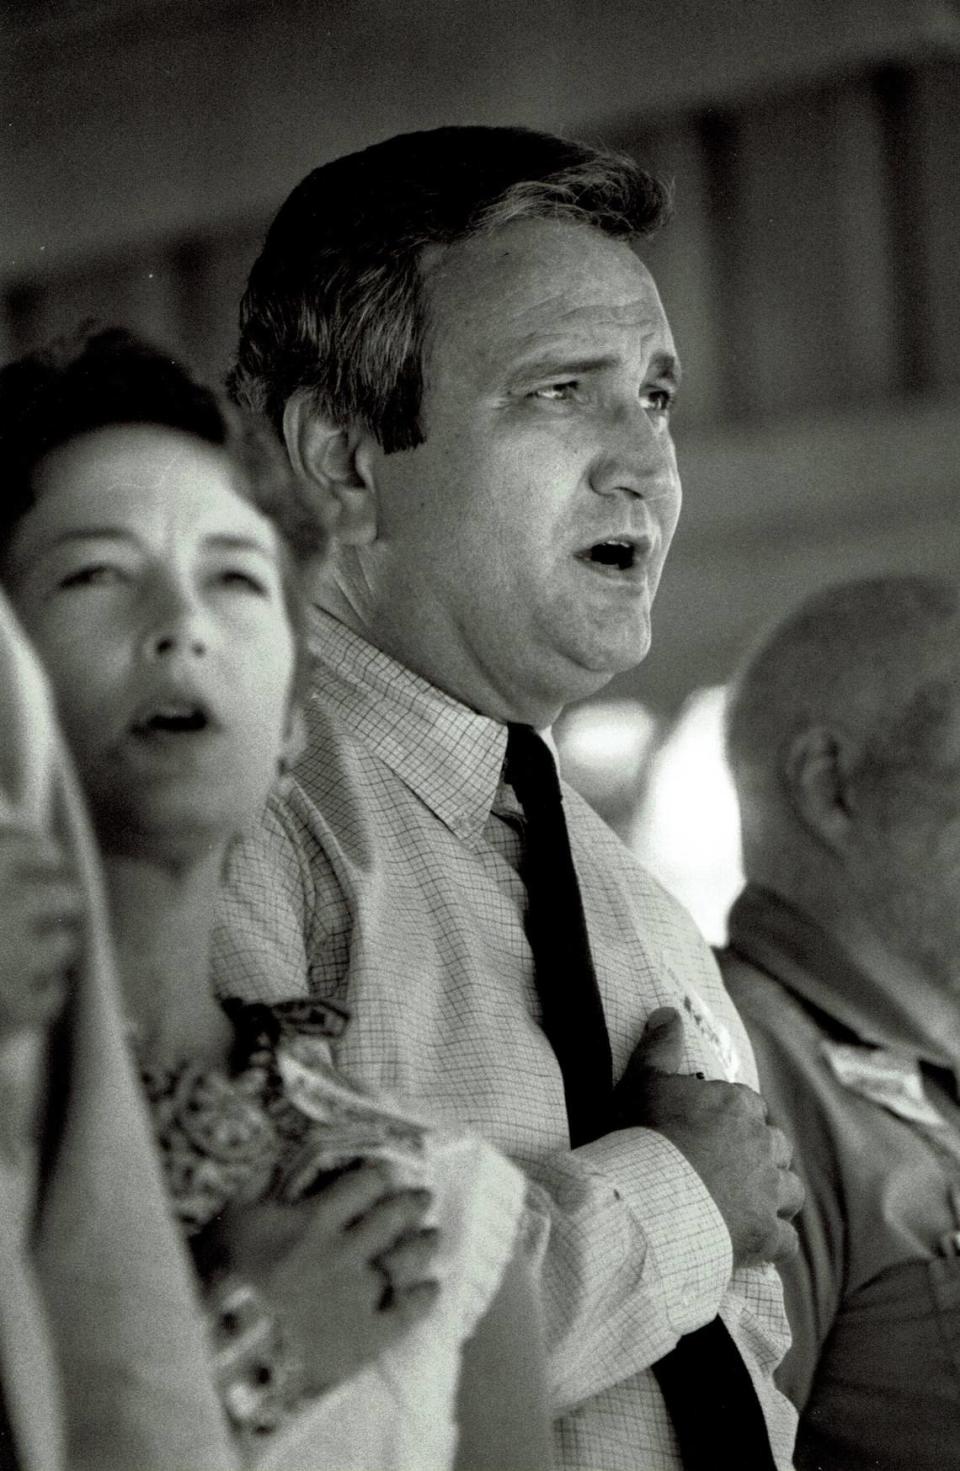 Republican candidate for governor, Larry Forgy, sang the National Anthem at the start of speeches at the 106th annual Fancy Farm political picnic in August 1986. Forgy withdrew from the race in 1987 citing difficulty with fundraising. His party’s nominee, John R. Harper, was defeated by Democratic businessman Wallace Wilkinson for the governor’s office. This year’s annual political event and fundraiser for St. Jerome Catholic Church in Graves County is today. Photo by Charles Bertram | Staff